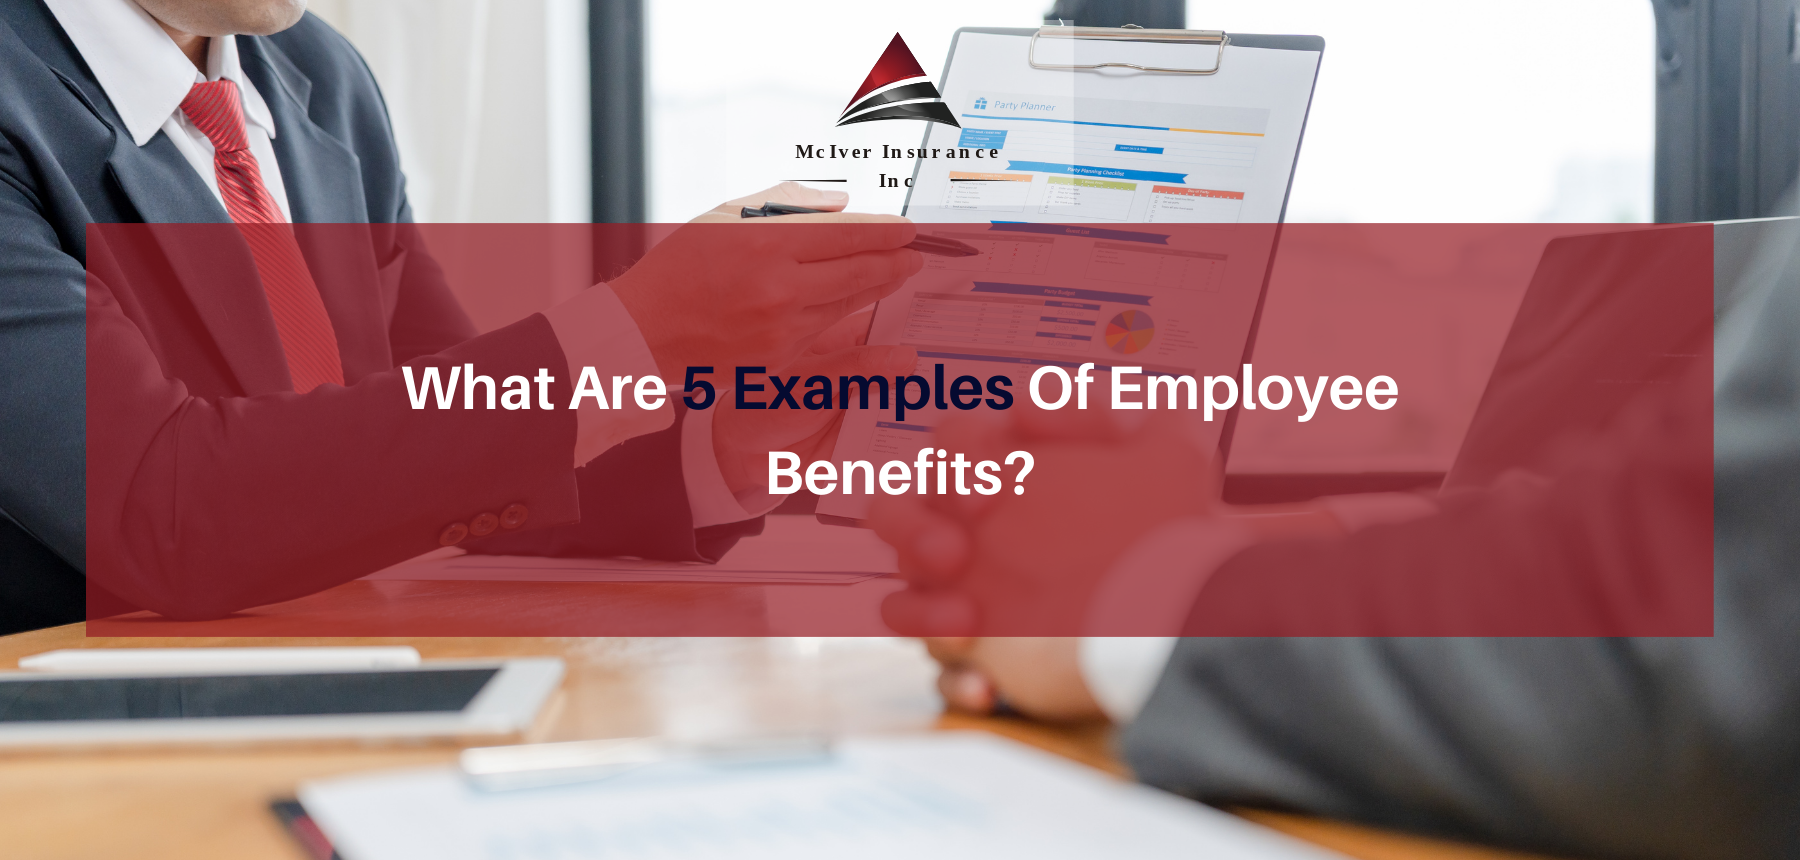 What Are 5 Examples Of Employee Benefits